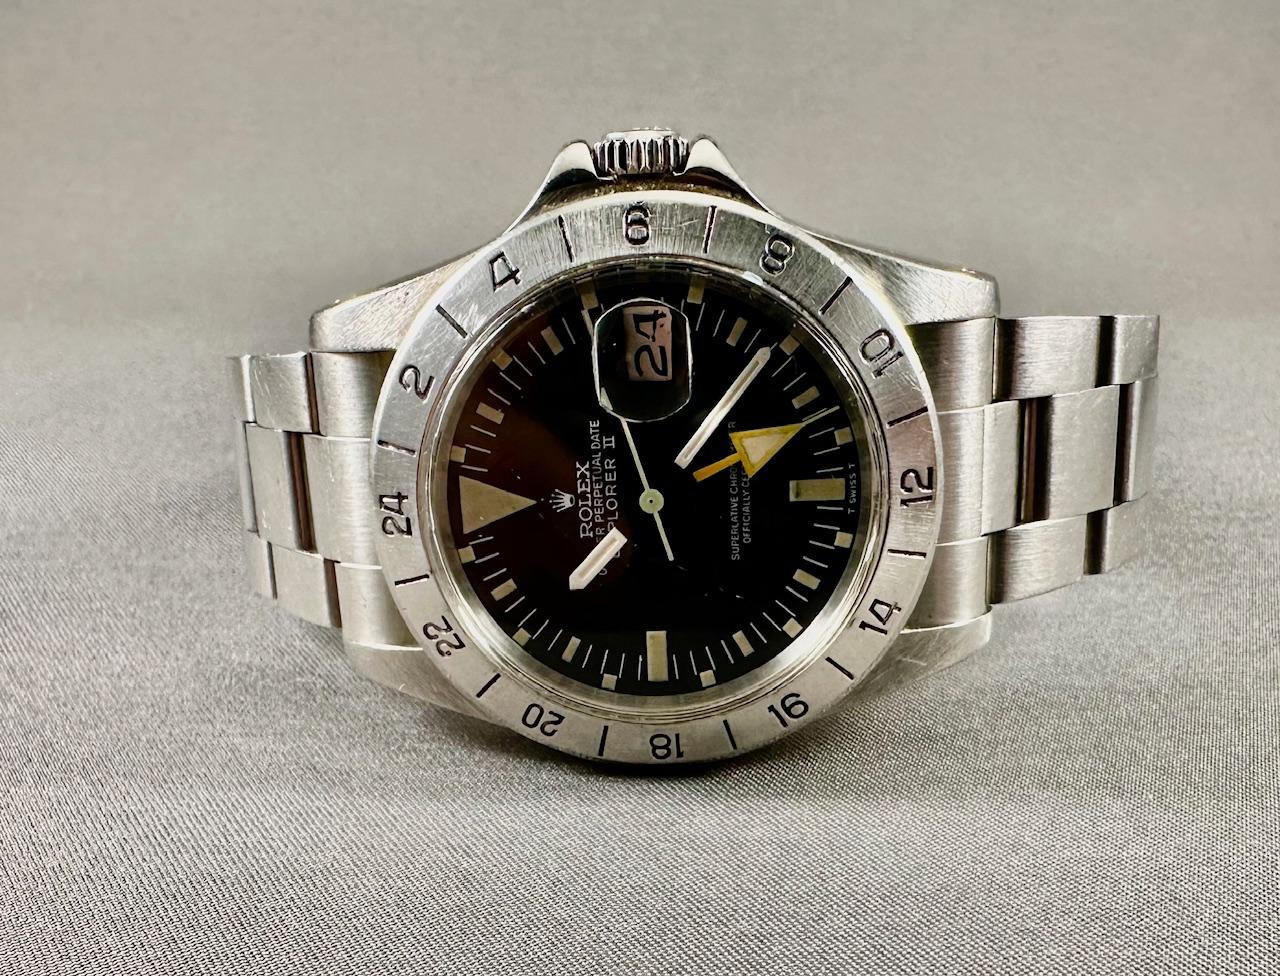 Brand: Vintage Rolex
Model: Explorer II
Year: 1971
Serial number: 327xxxxx
Reference: #1655

Case: Show normal sign of wear with no sign of polish from previous; inner case back stamped 1655

Dial: Excellent Condition Tritium Matte Dial where the